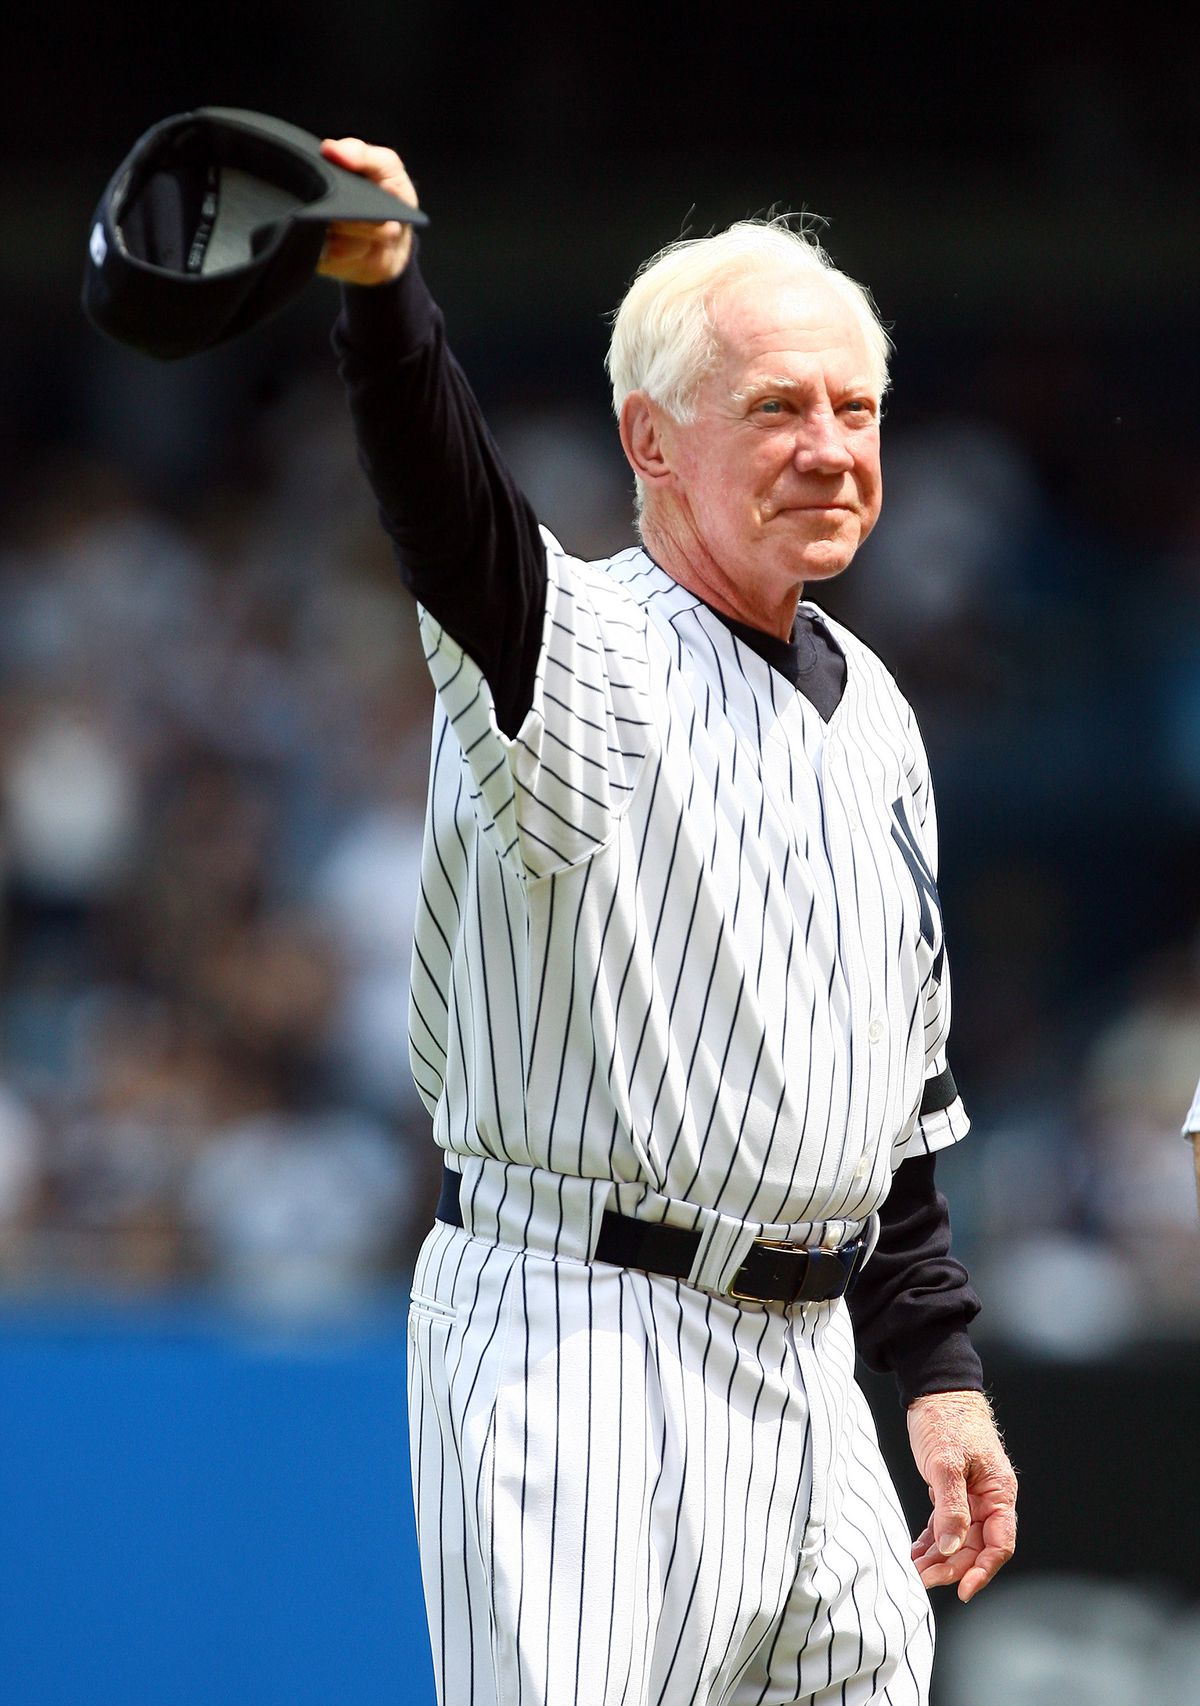 Former New York Yankees’ pitcher Whitey Ford tips his hat to